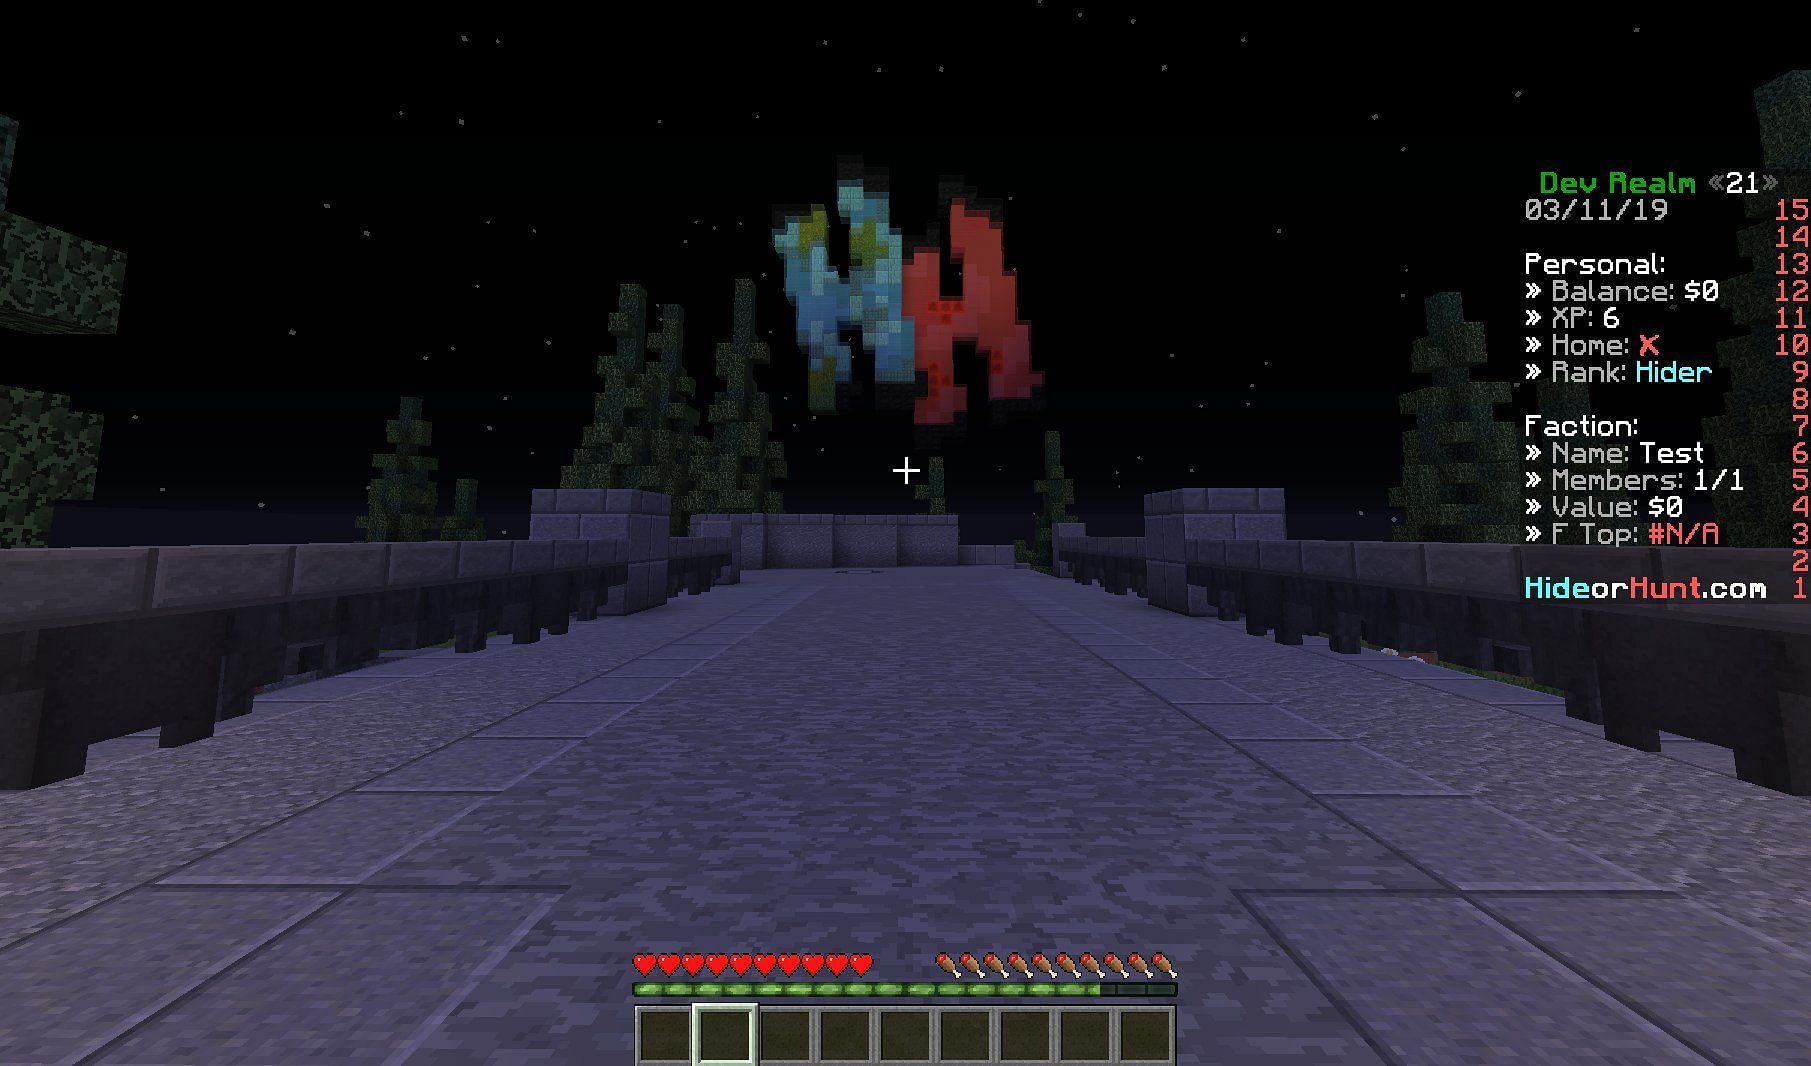 This network is a great place to enjoy the classic Hide or Hunt minigame (Image via Mojang)